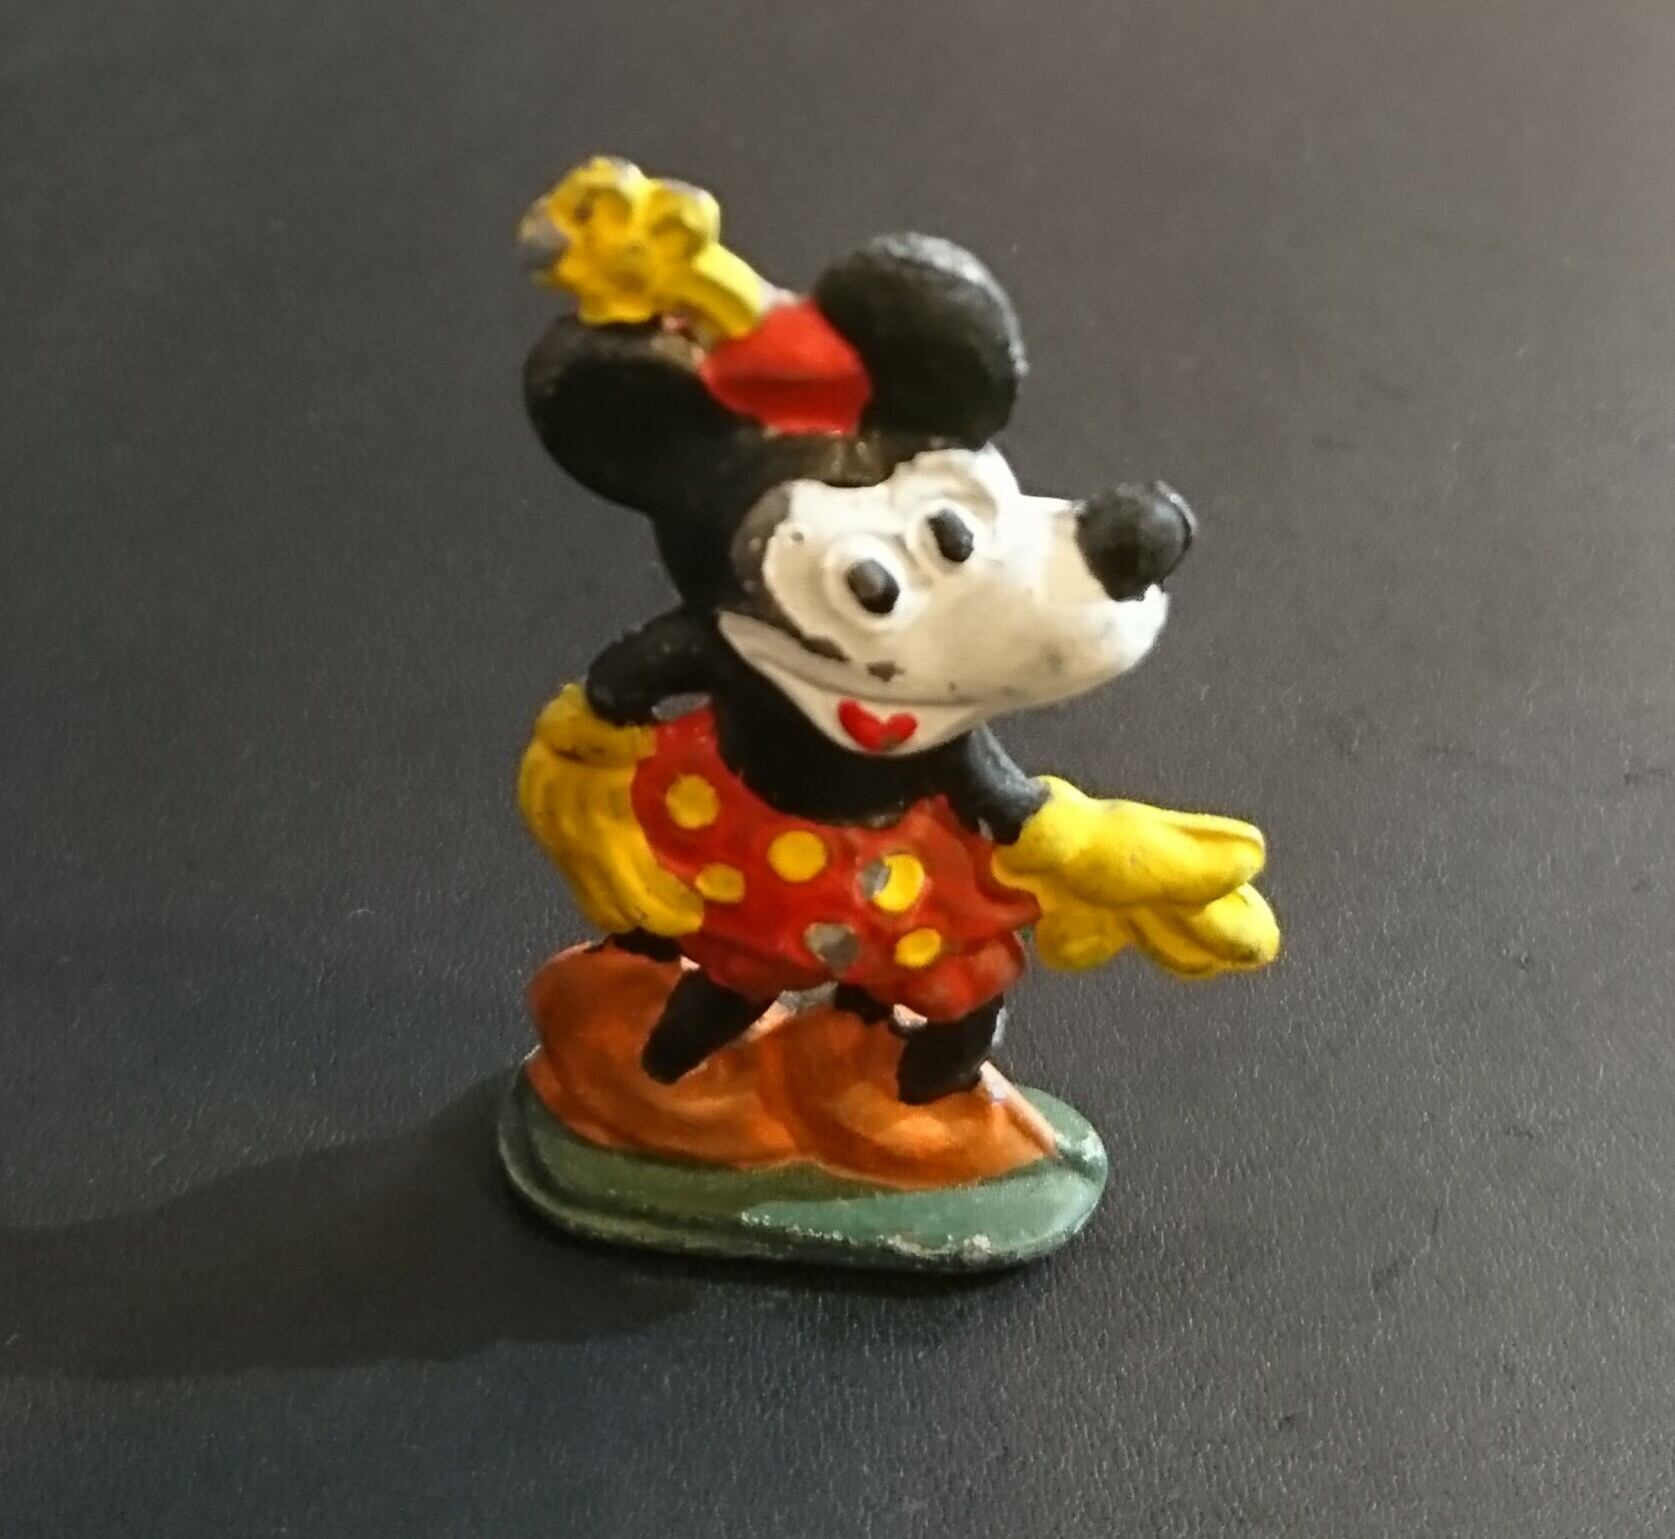 40s vintage Minnie Mouse アンティーク ミニー マウス